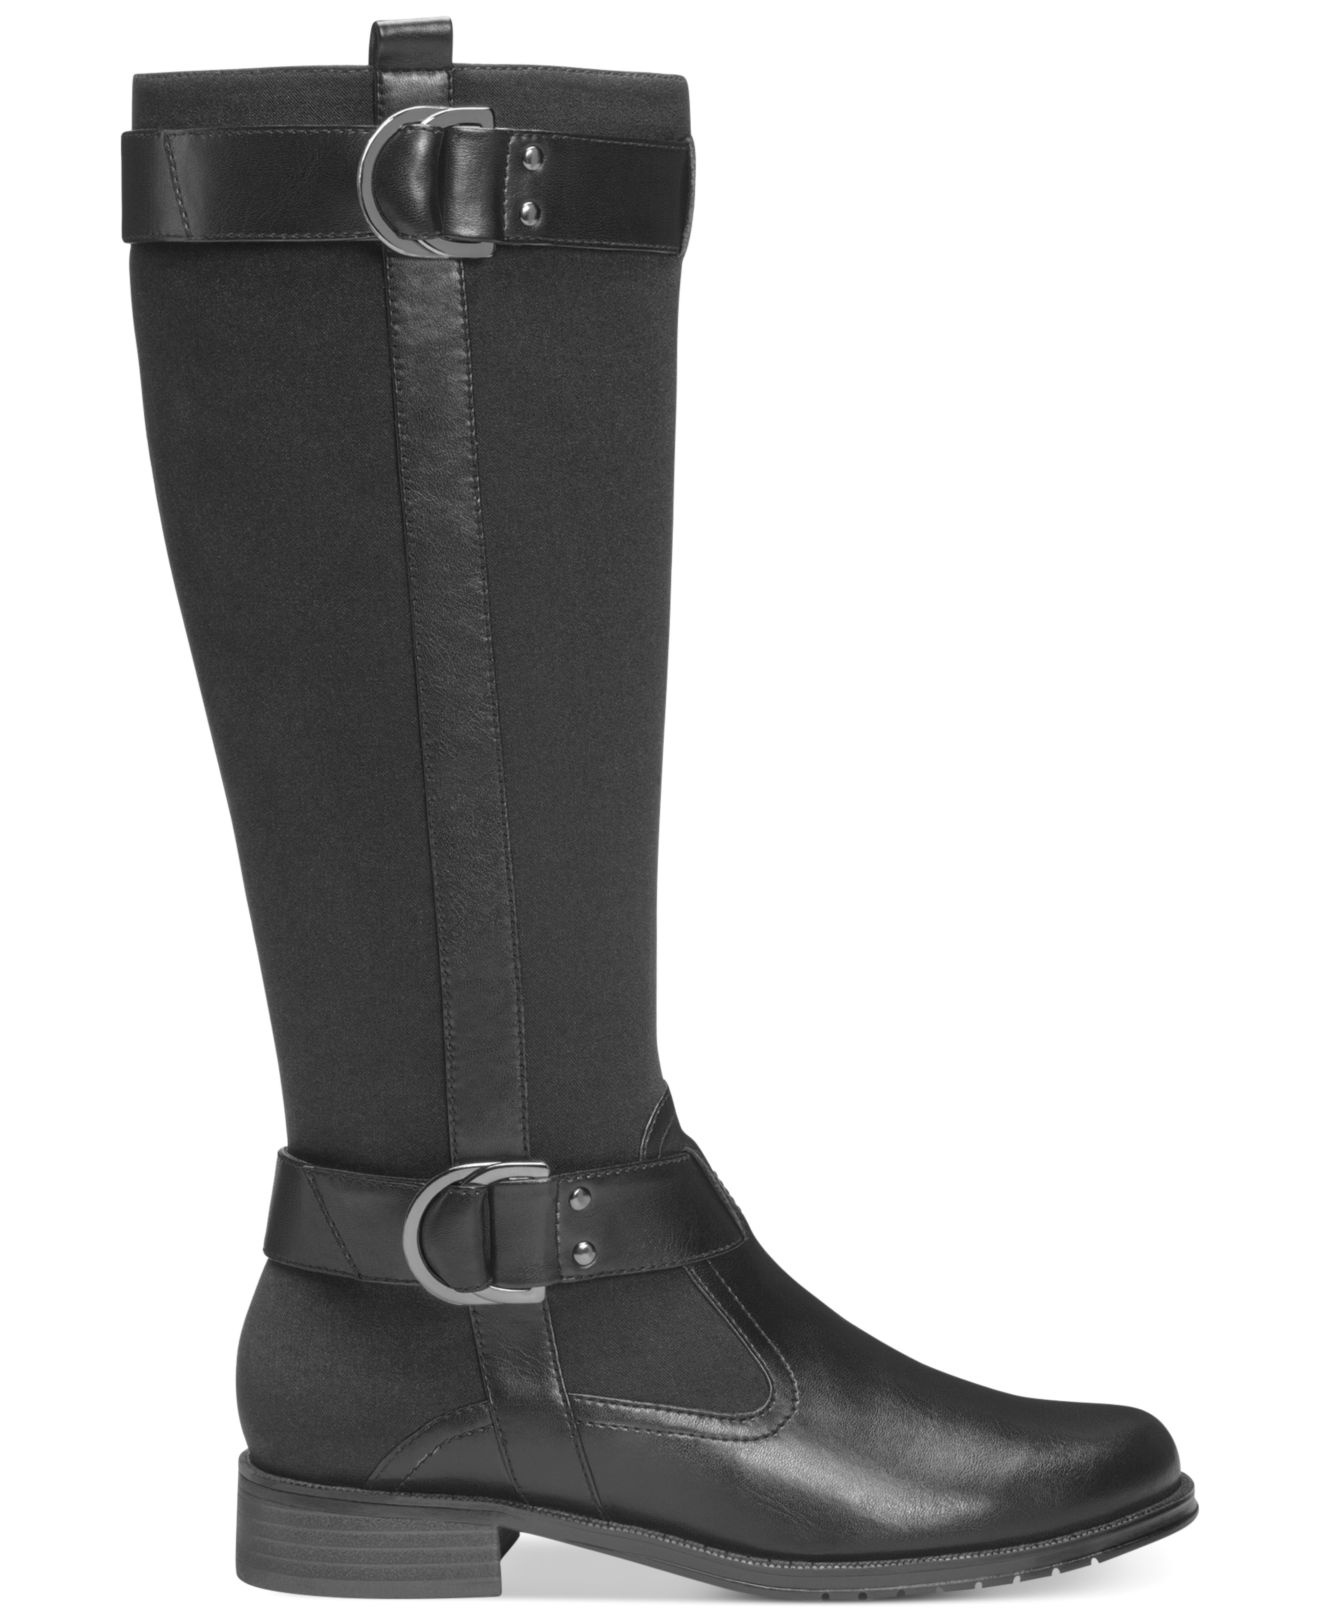 Aerosoles Ride Line Tall Boots in Black 